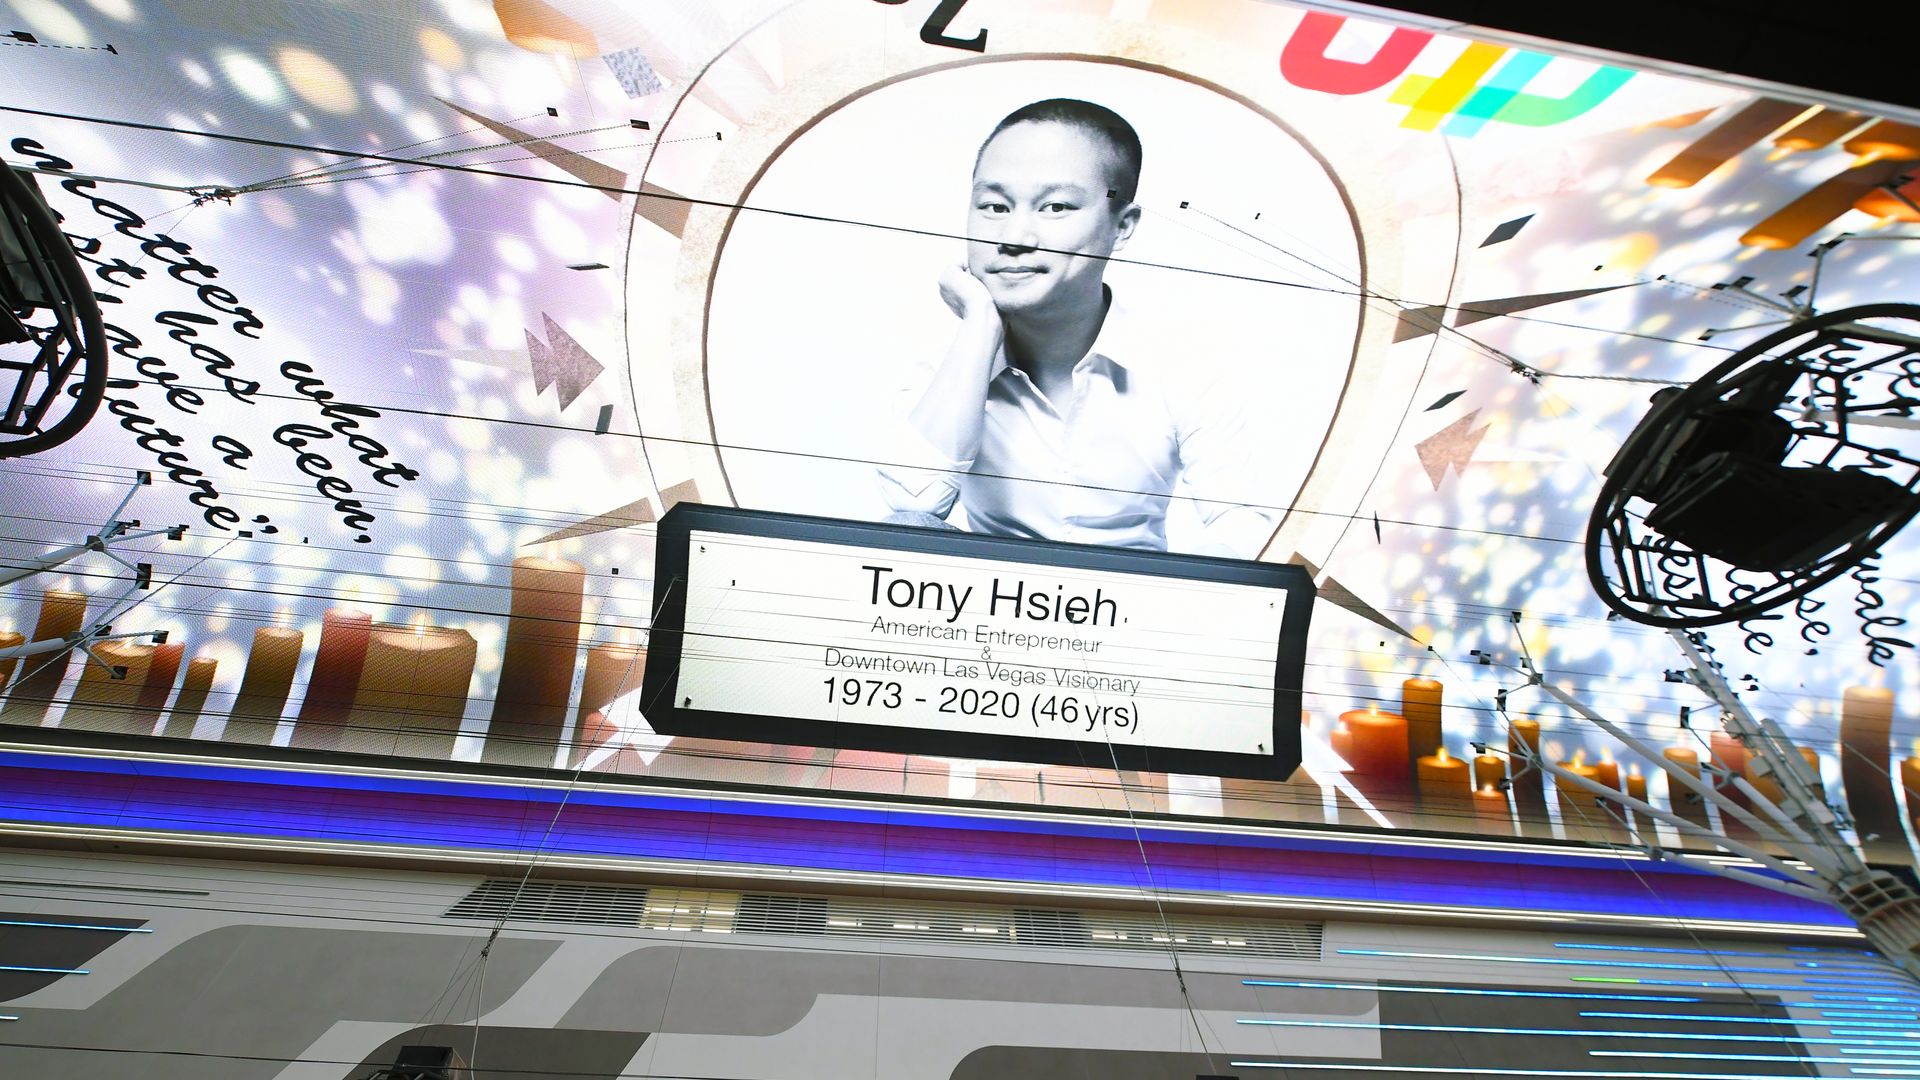 LAS VEGAS, NEVADA - NOVEMBER 28: A tribute to tech entrepreneur Tony Hsieh is displayed on the Fremont Street Experience attraction's Viva Vision screen on November 28, 2020 in Las Vegas, Nevada. 